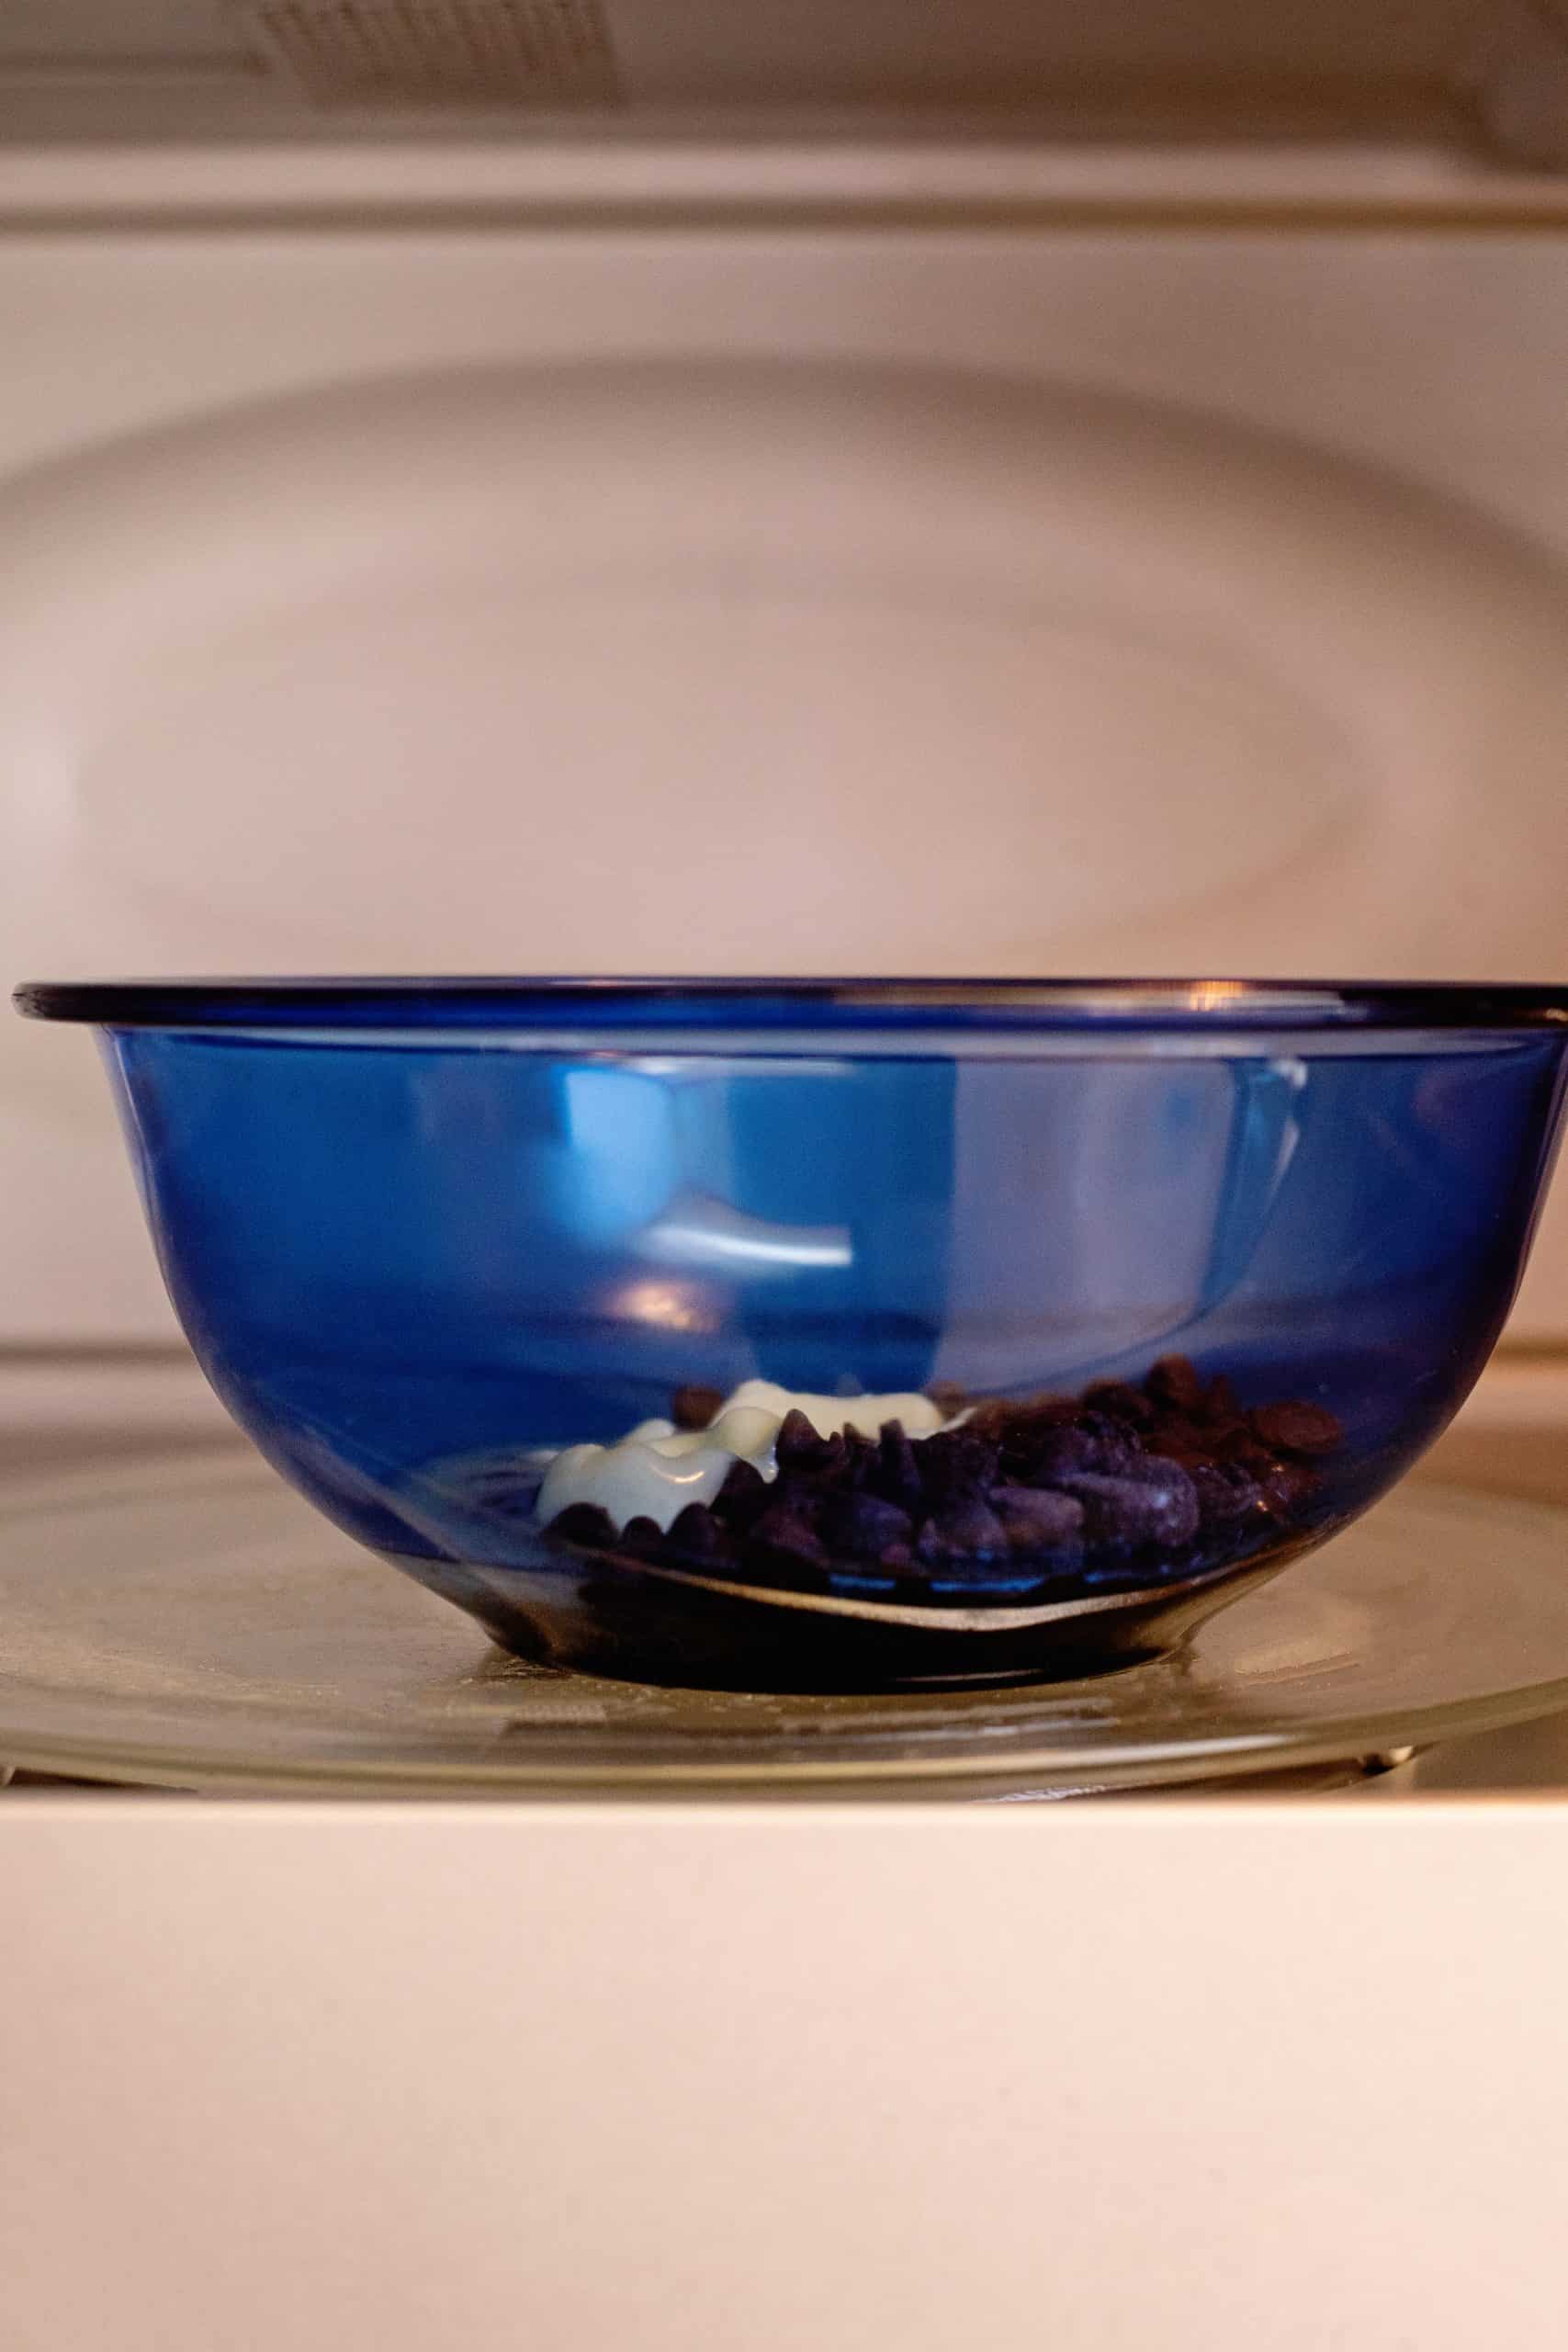 Chocolate ingredients added to bowl in microwave